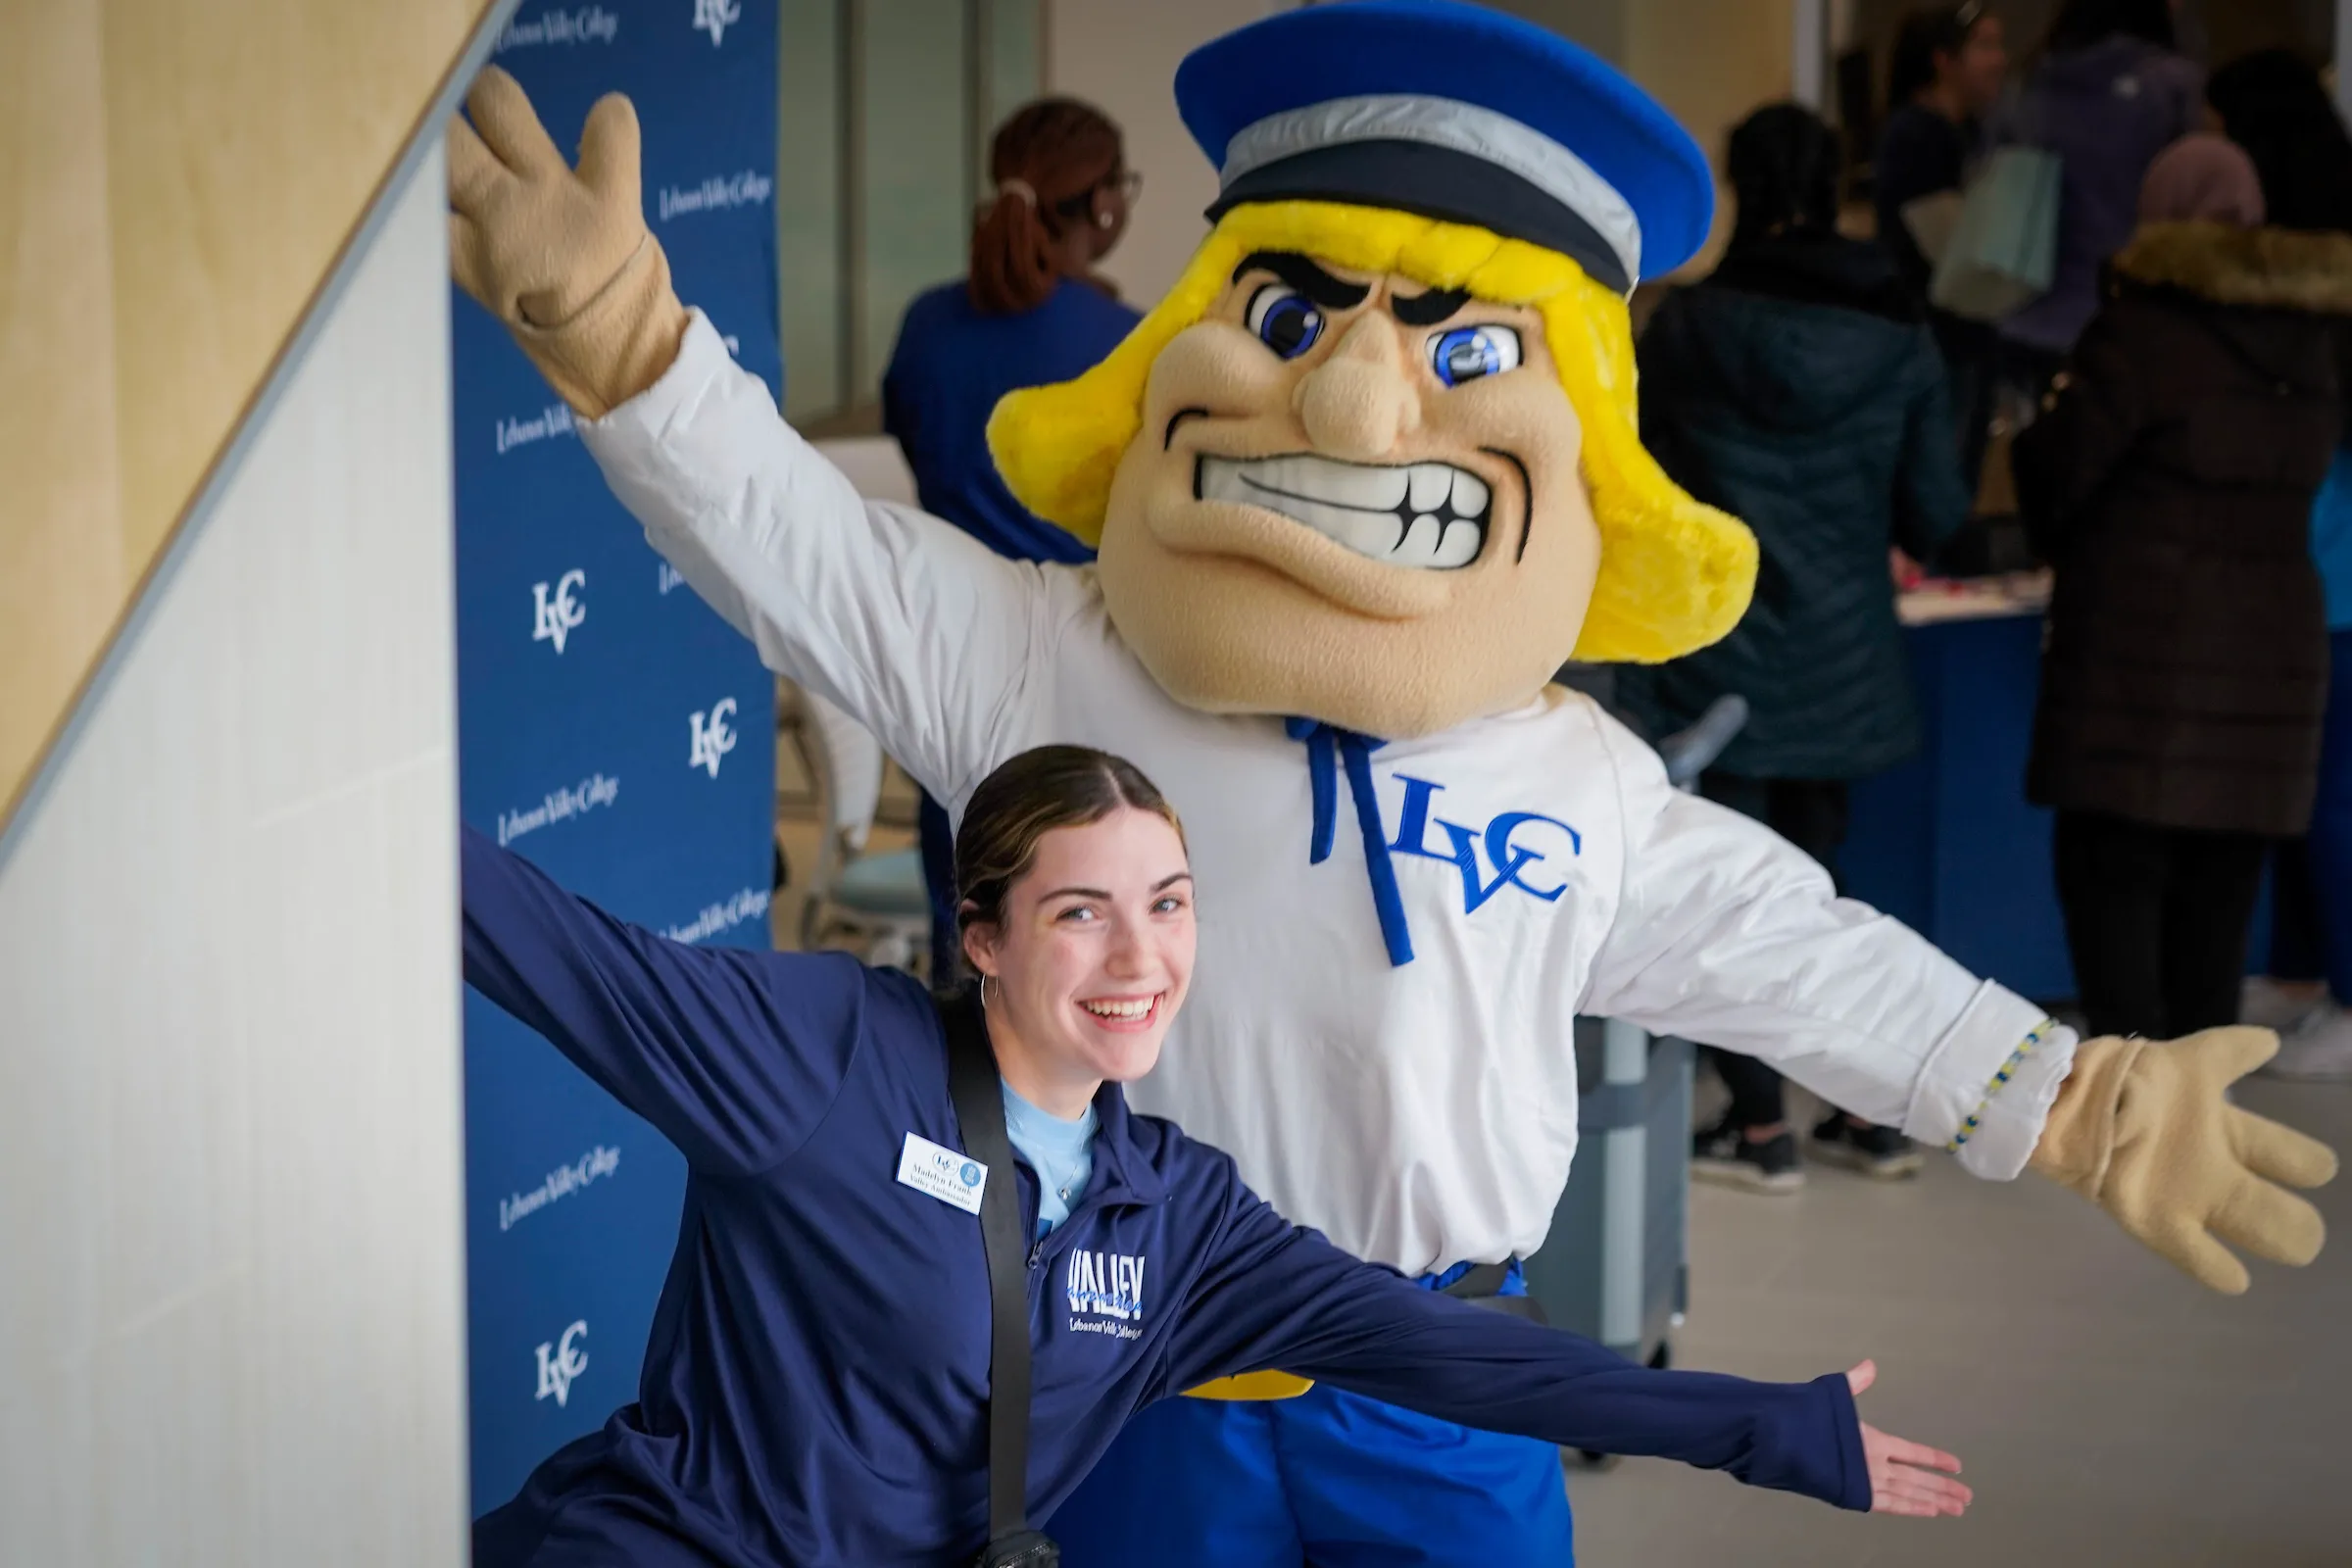 LVC Valley Ambassador poses with Dutchman mascot at LVC Live admitted student event